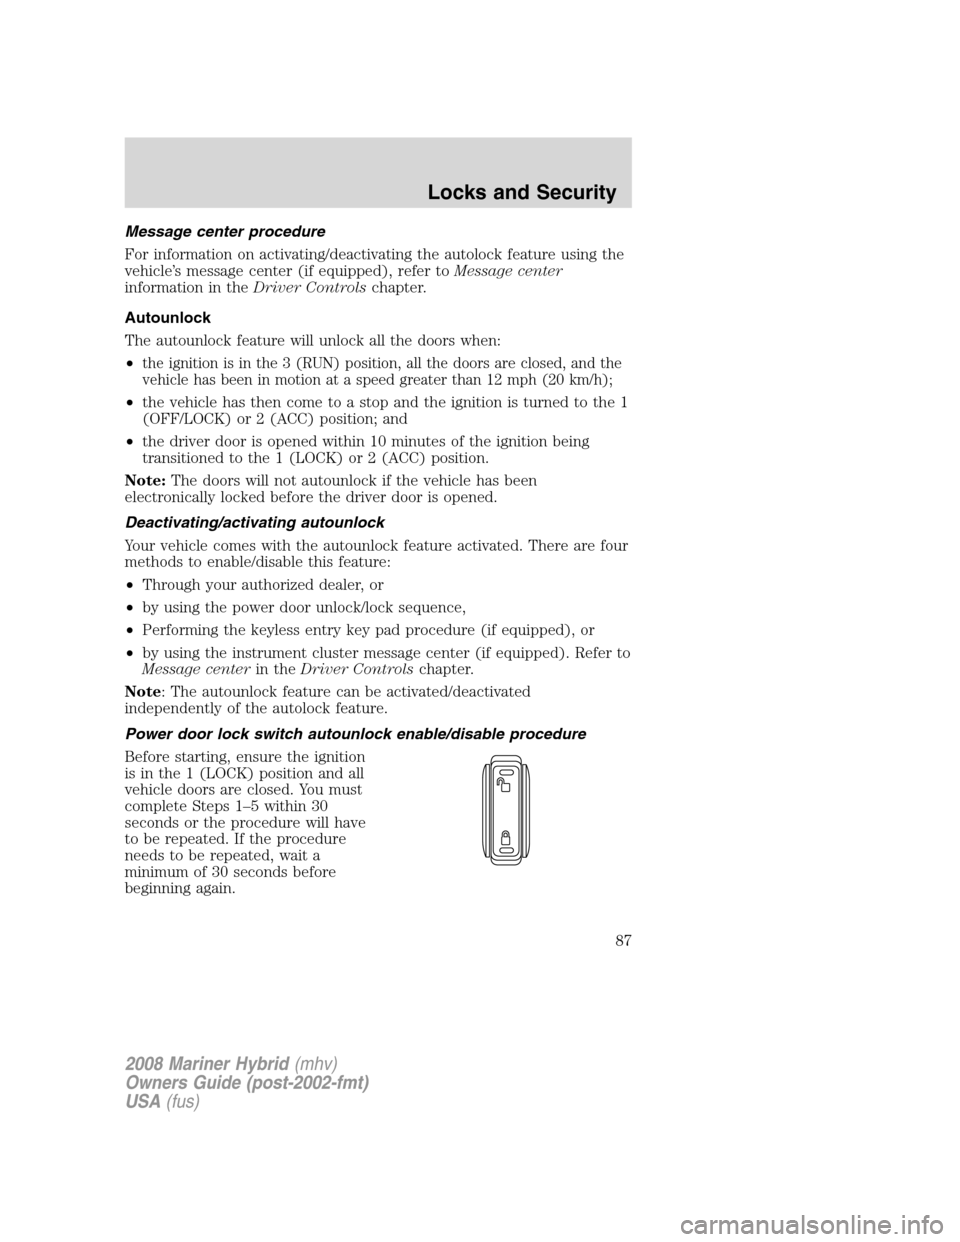 Mercury Mariner Hybrid 2008  Owners Manuals Message center procedure
For information on activating/deactivating the autolock feature using the
vehicle’s message center (if equipped), refer toMessage center
information in theDriver Controlscha